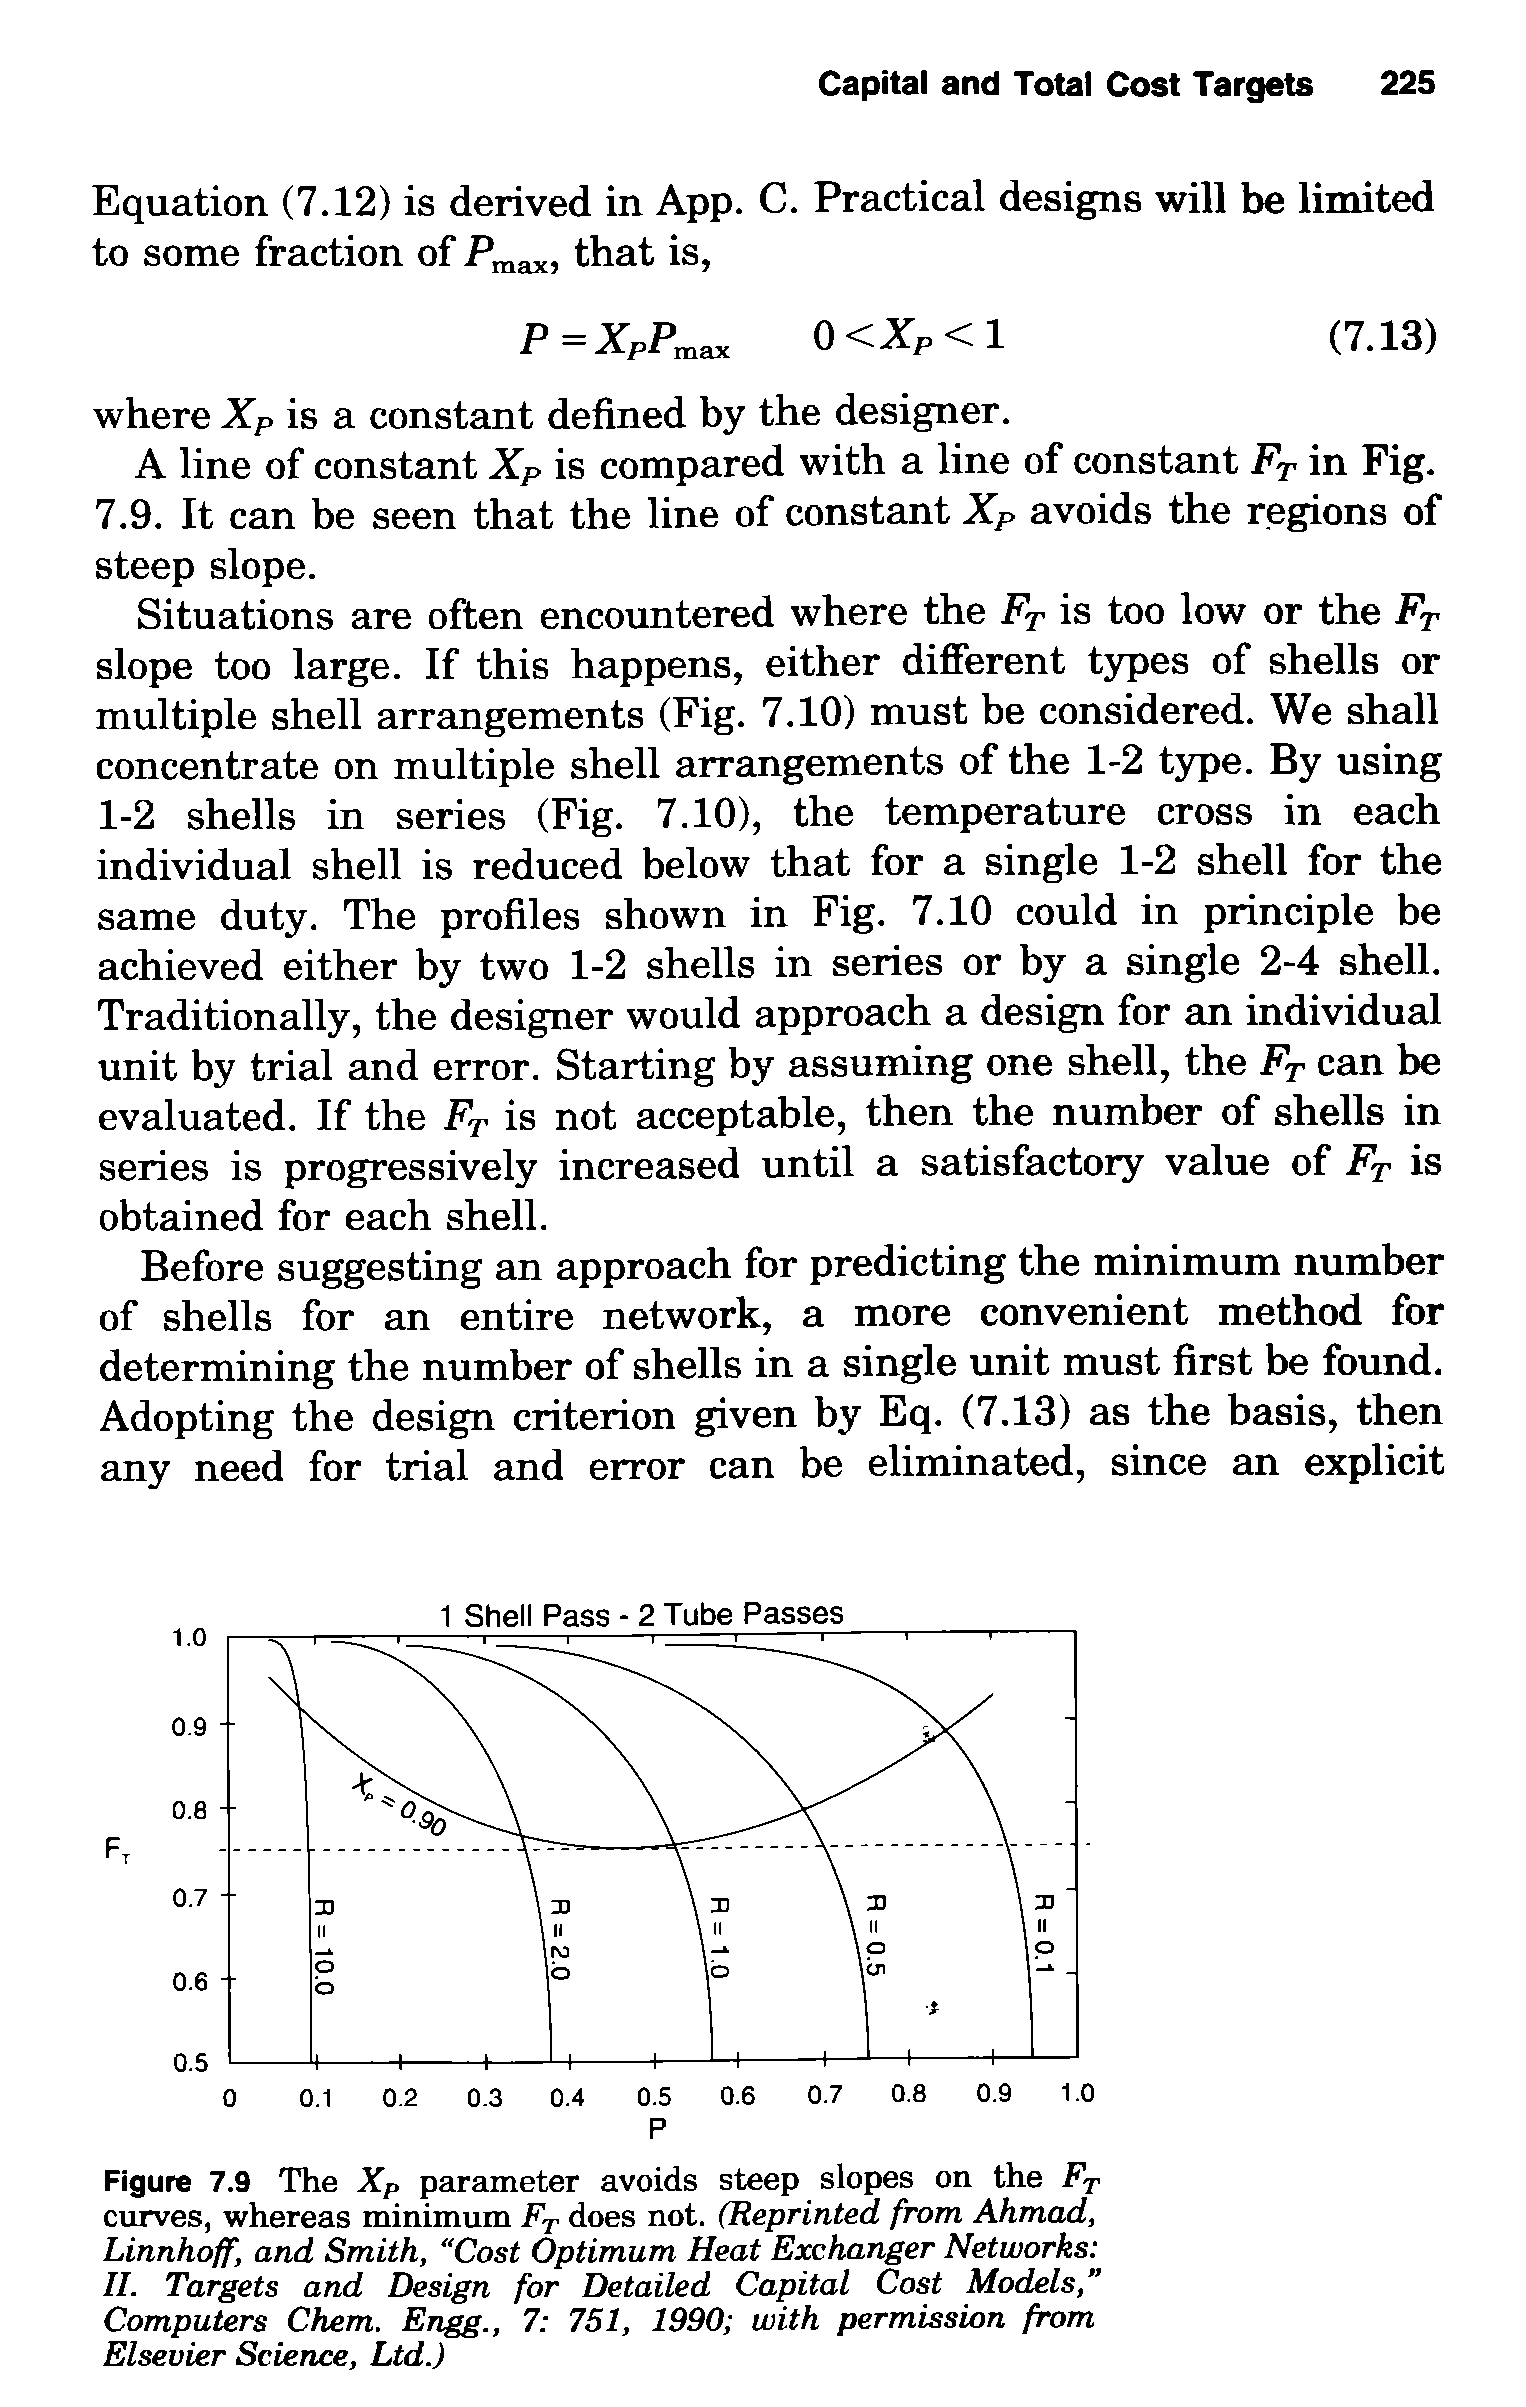 Figure 7.9 The Xp parameter avoids steep slopes on the Fp curves, whereas minimum Fp does not. (Reprinted from Ahmad, Linnhoff, and Smith, Cost Optimum Heat Exchanger Networks II. Targets and Design for Detailed Capital Cost Models, Computers Chem, Engg., 7 751, 1990 with permission from Elsevier Science, Ltd.)...